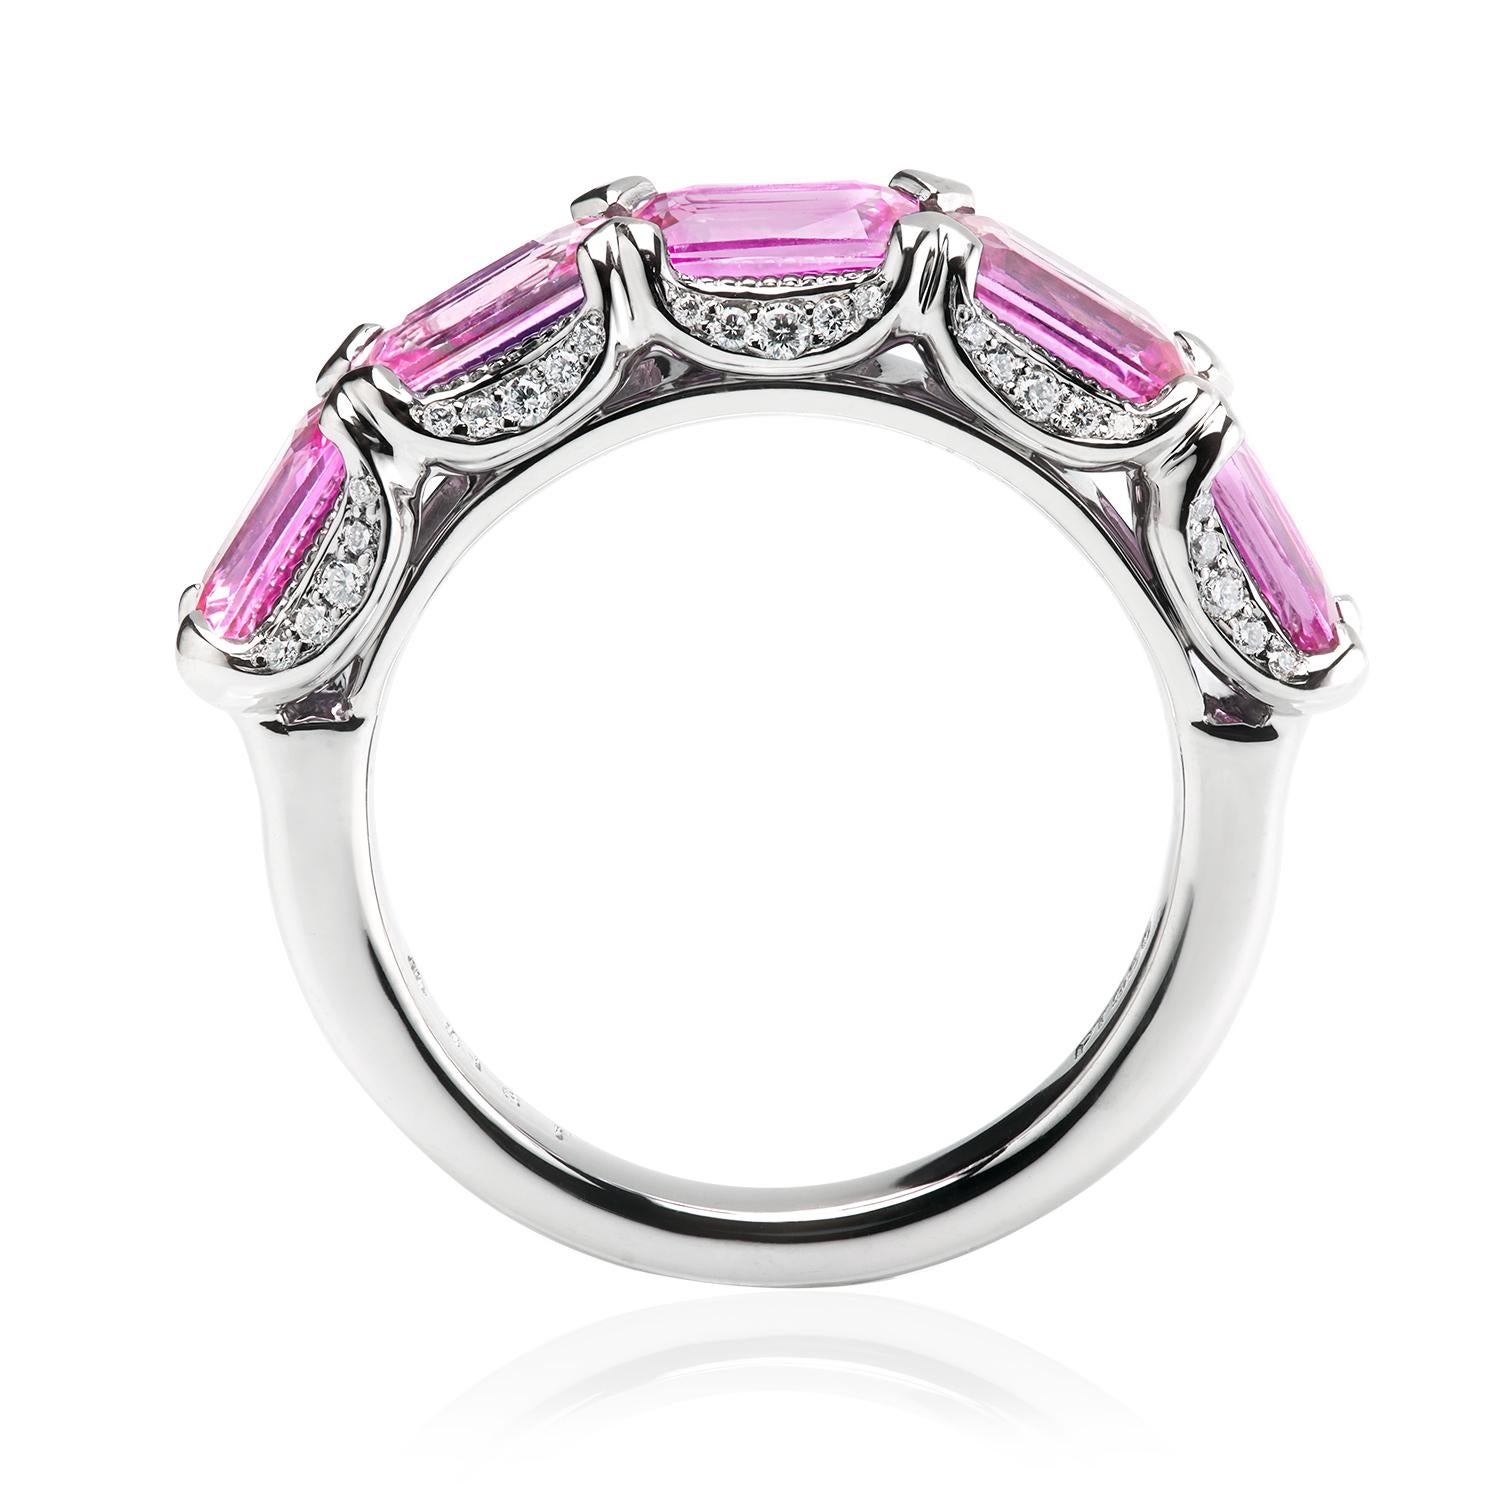 Express yourself with colors to show the world your sense of  fashion and taste! East-west set right-hand platinum ring is set with five beautiful pink sapphires, total weight 3.47 carat. Unique U-shaped shared prong design set with 50 full cut